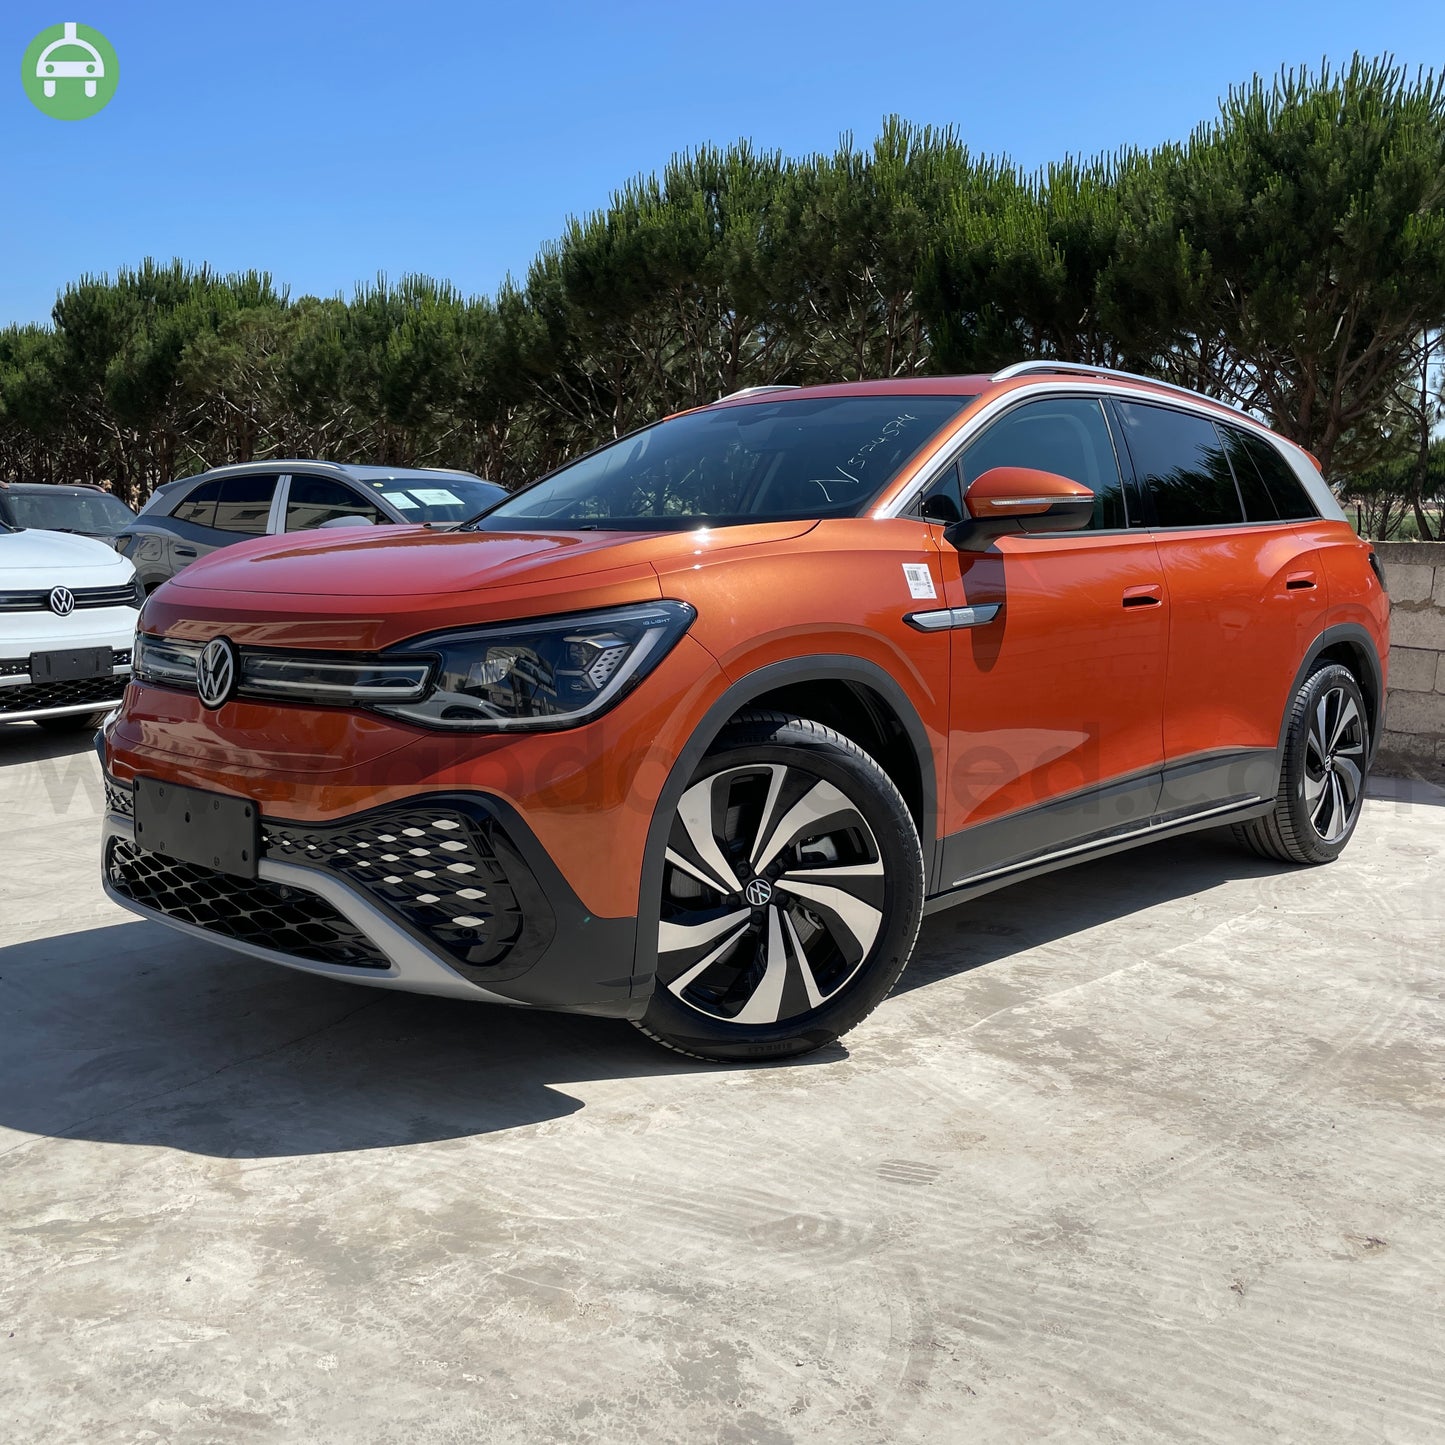 VW ID6 Crozz Pure+ 2022 7-Seater Lava Orange Color 550km Range/Charge Fully Electric Car (New - 0KM)